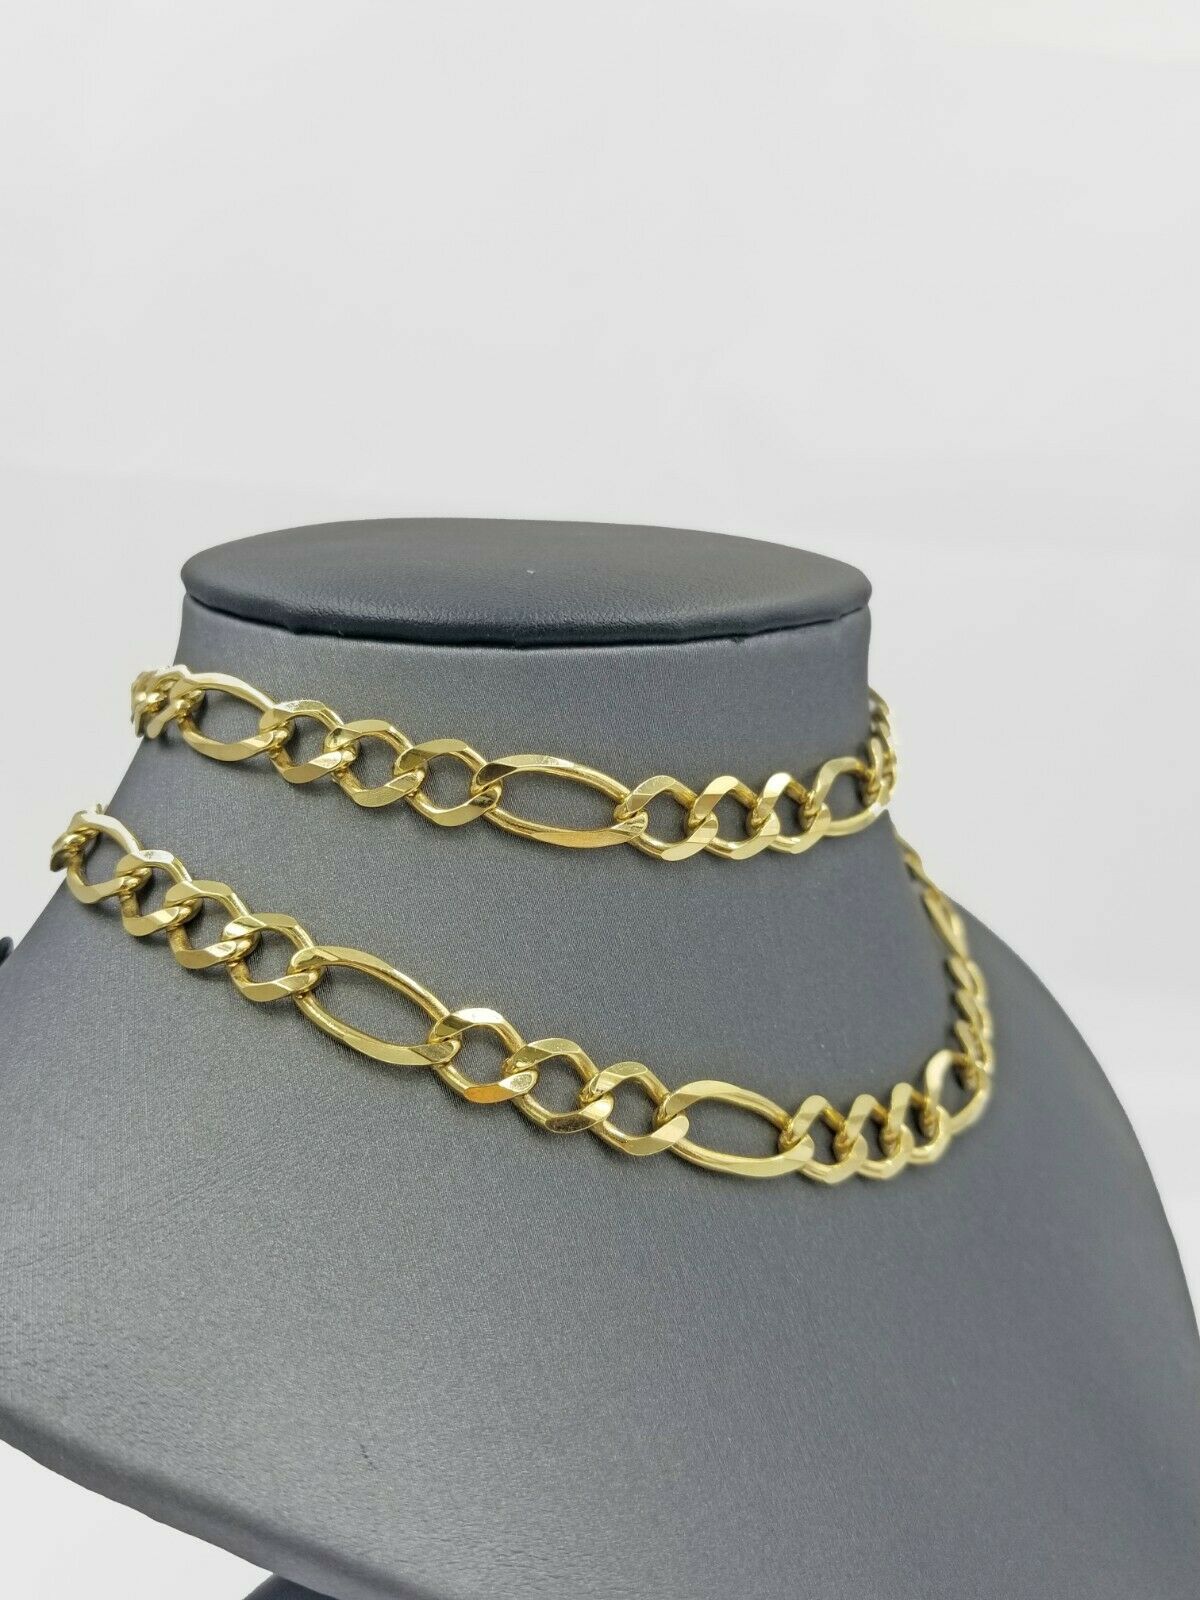 REAL 10k Gold SOLID Mens Necklace Figaro Link Chain 20